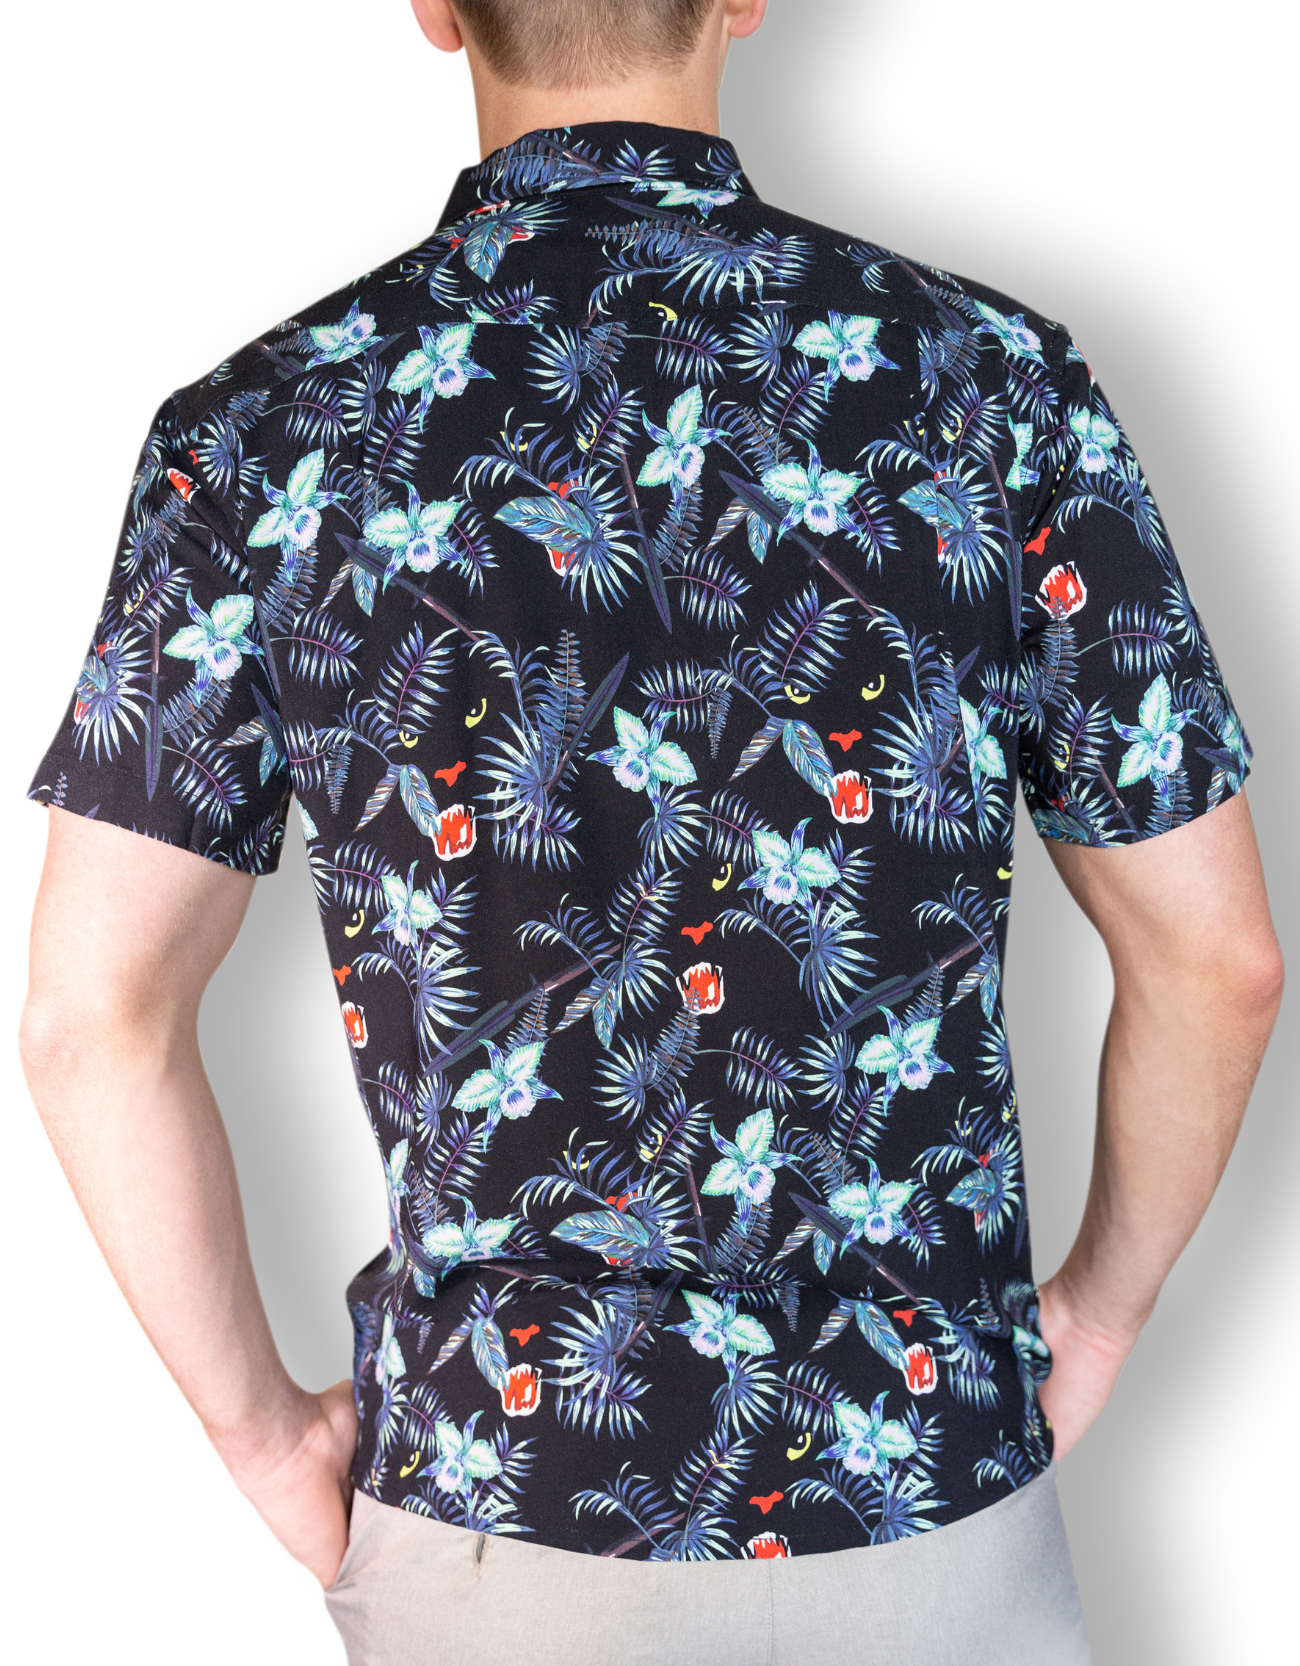 PANTHER 86 - NIGHTHAWK™ BUTTON UP by Bajallama